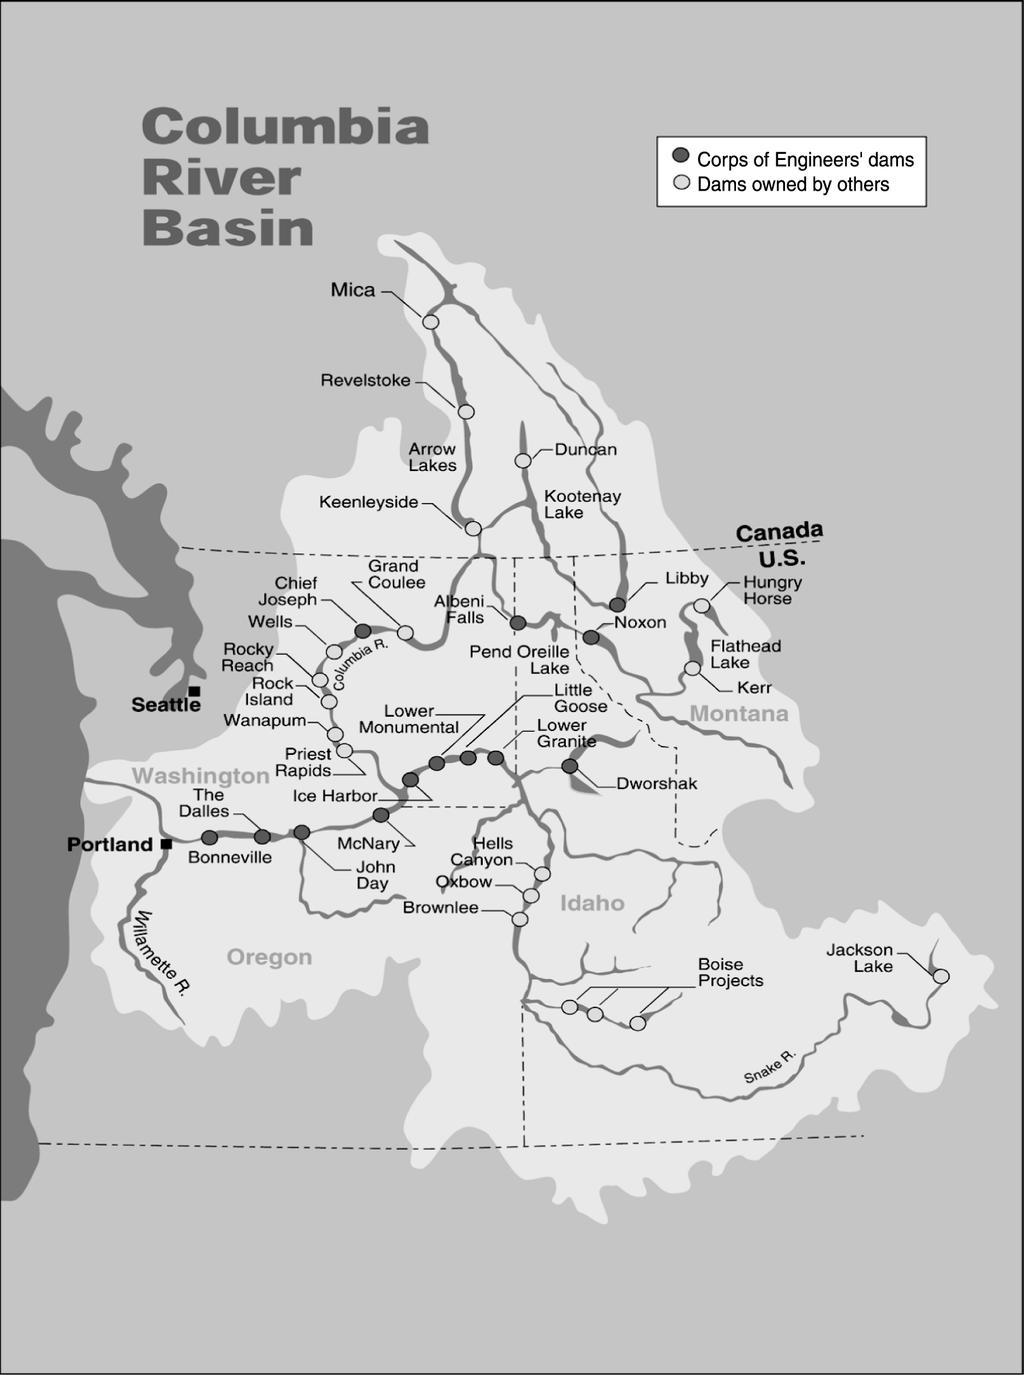 Figure 1: Map of the Columbia River Basin